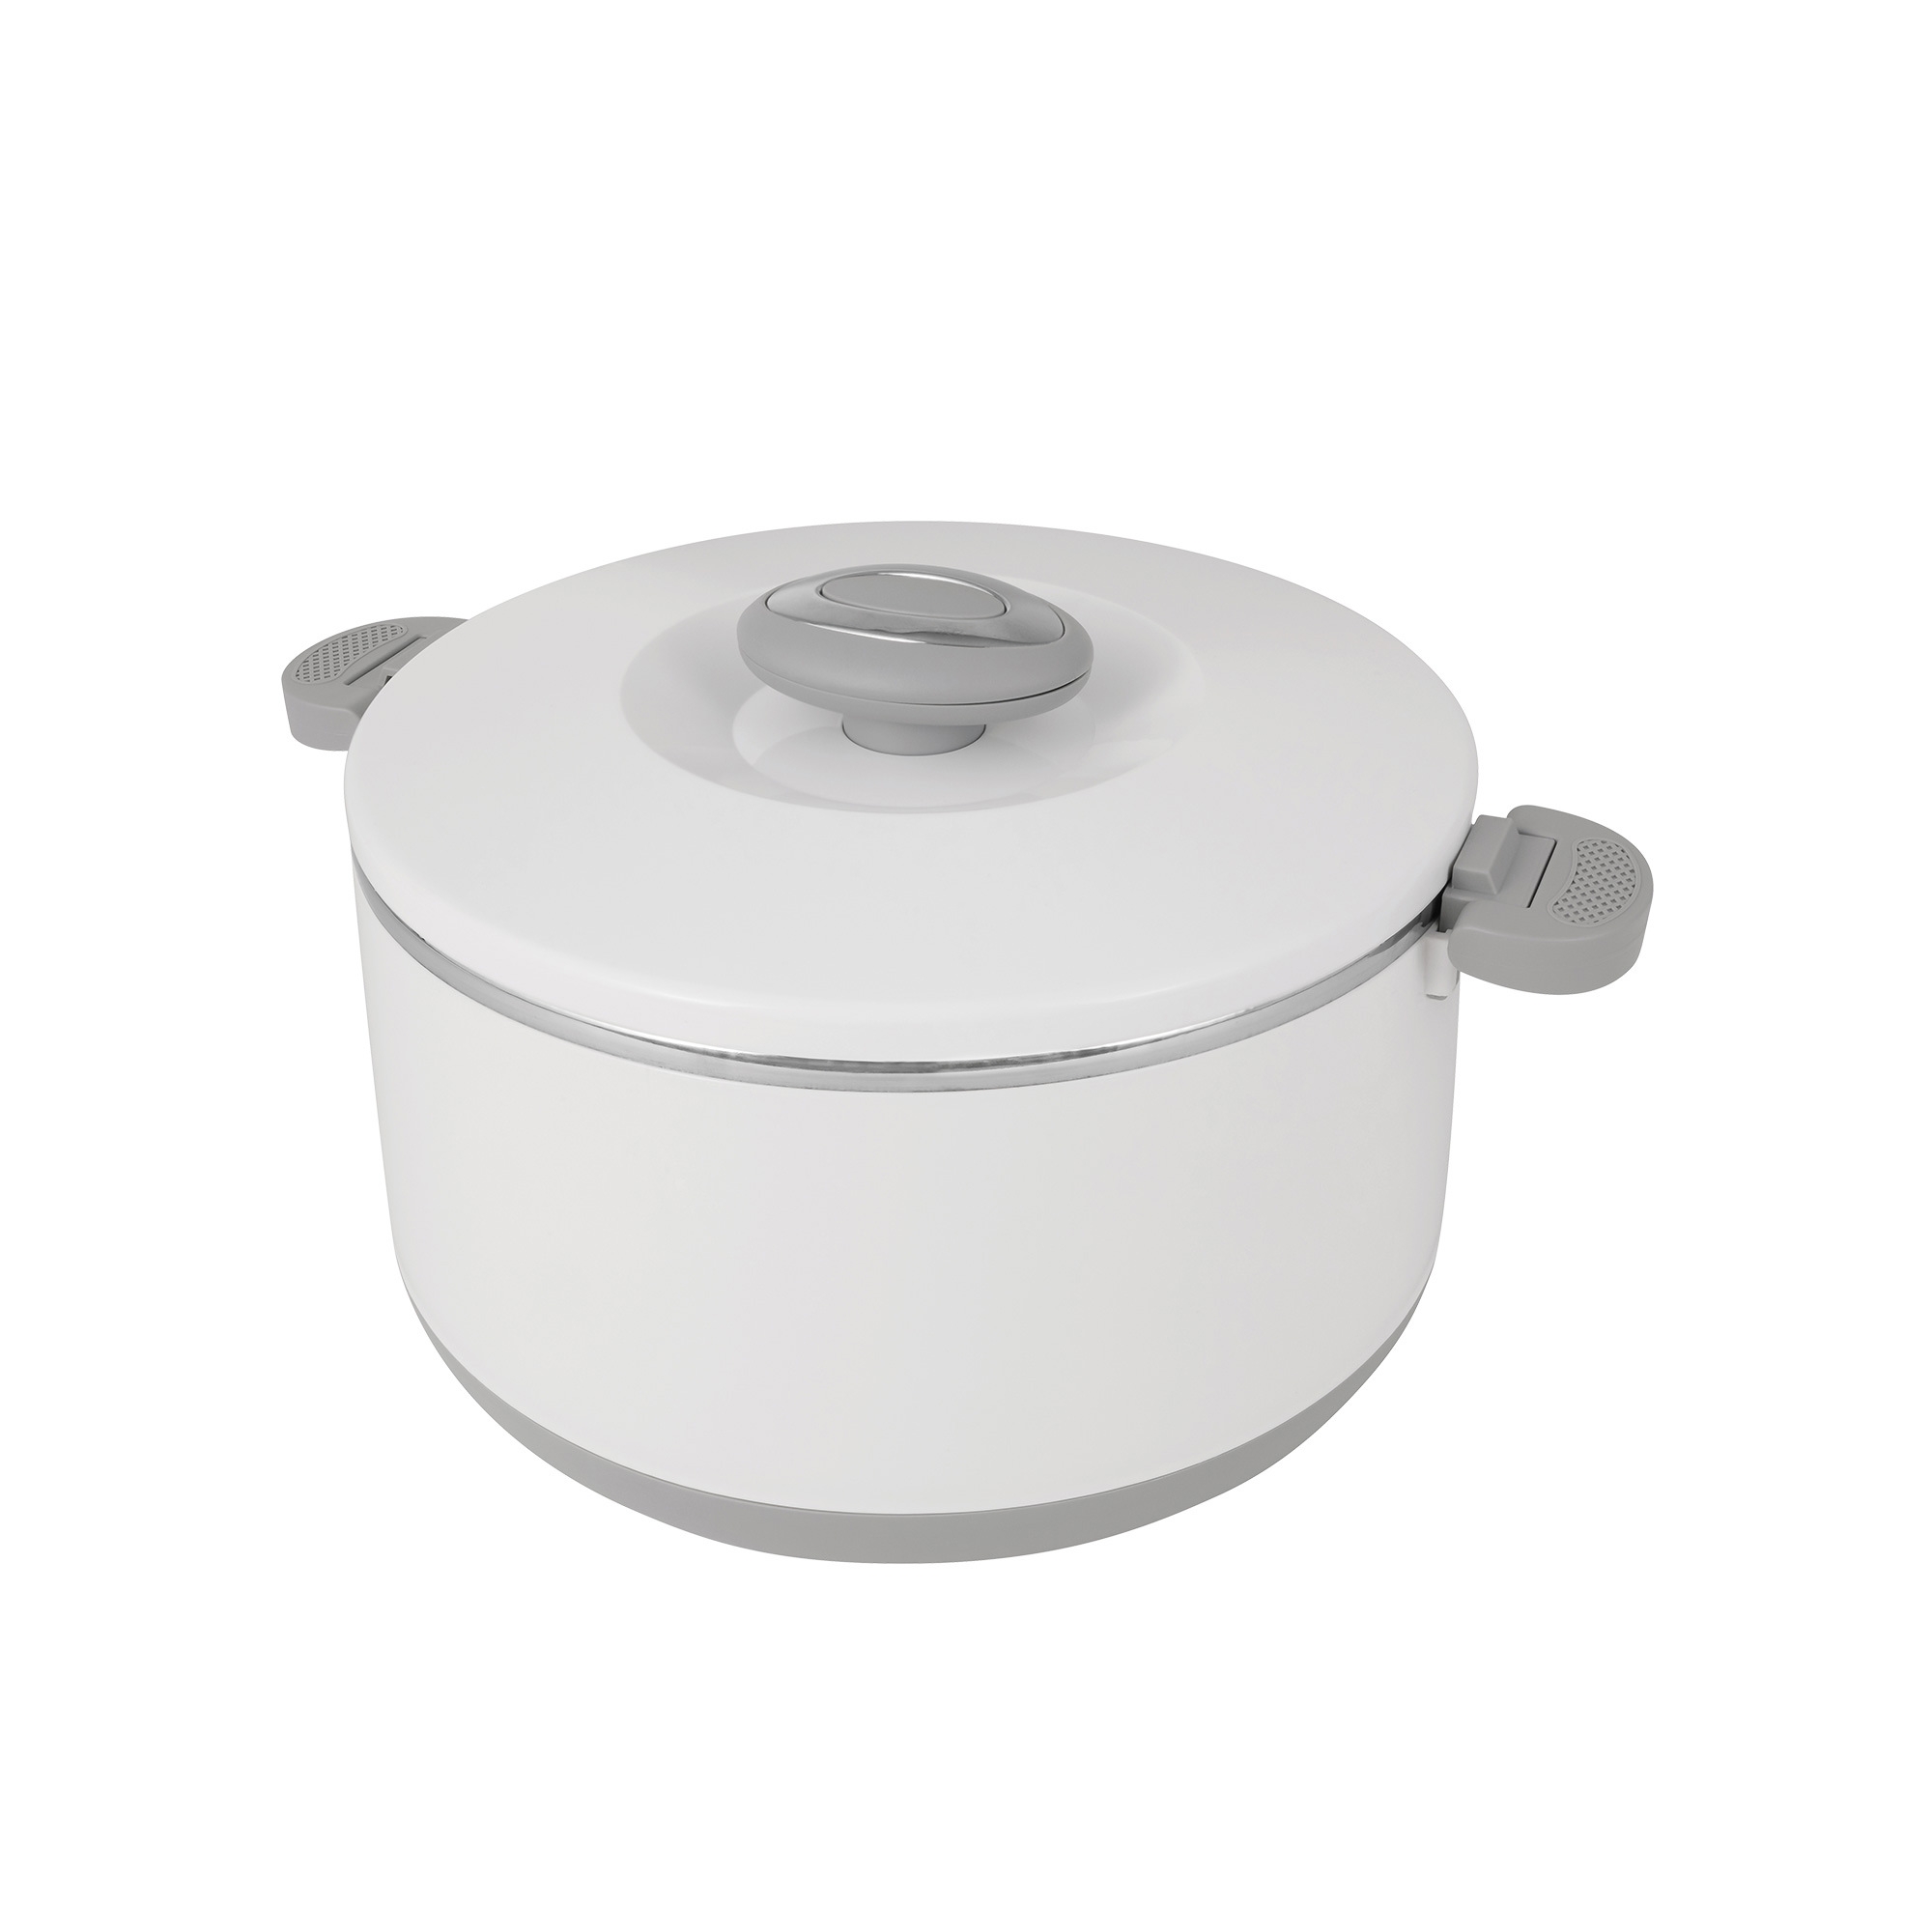 Pyrolux Pyrotherm Food Warmer 2L Image 1